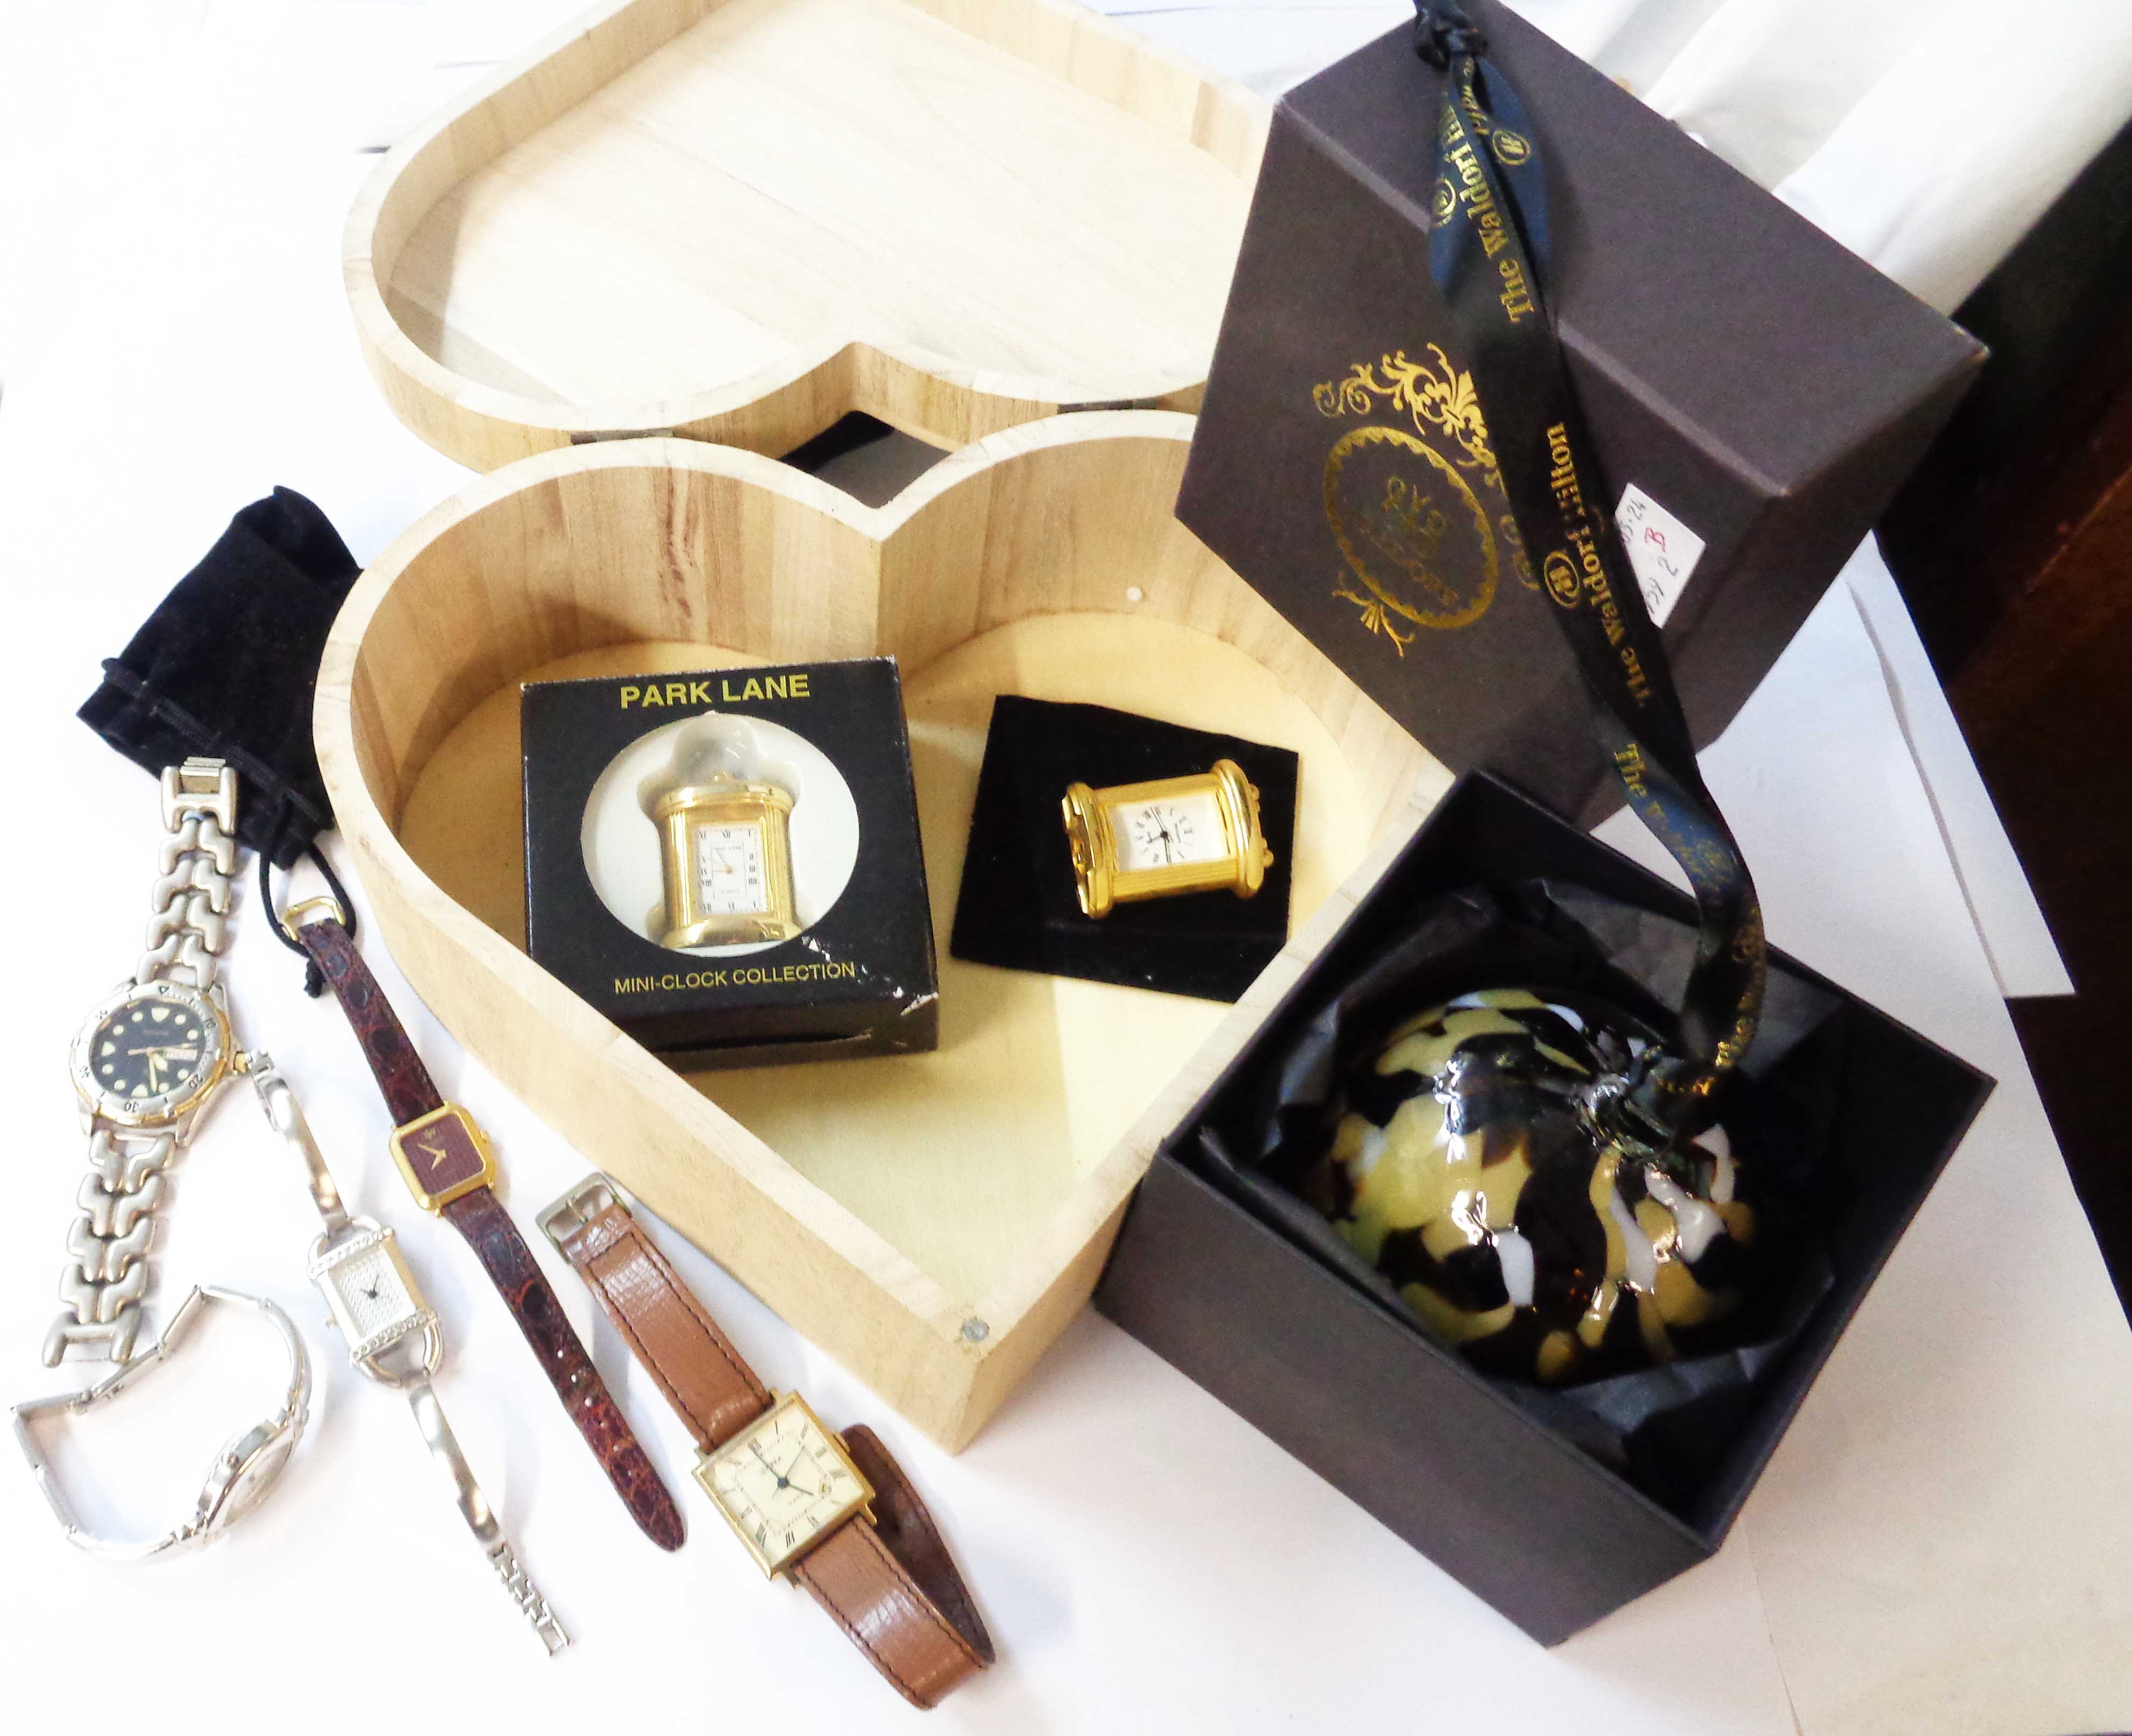 A wooden heart shaped box containing a vintage Seiko square dial wristwatch (a/f), four modern